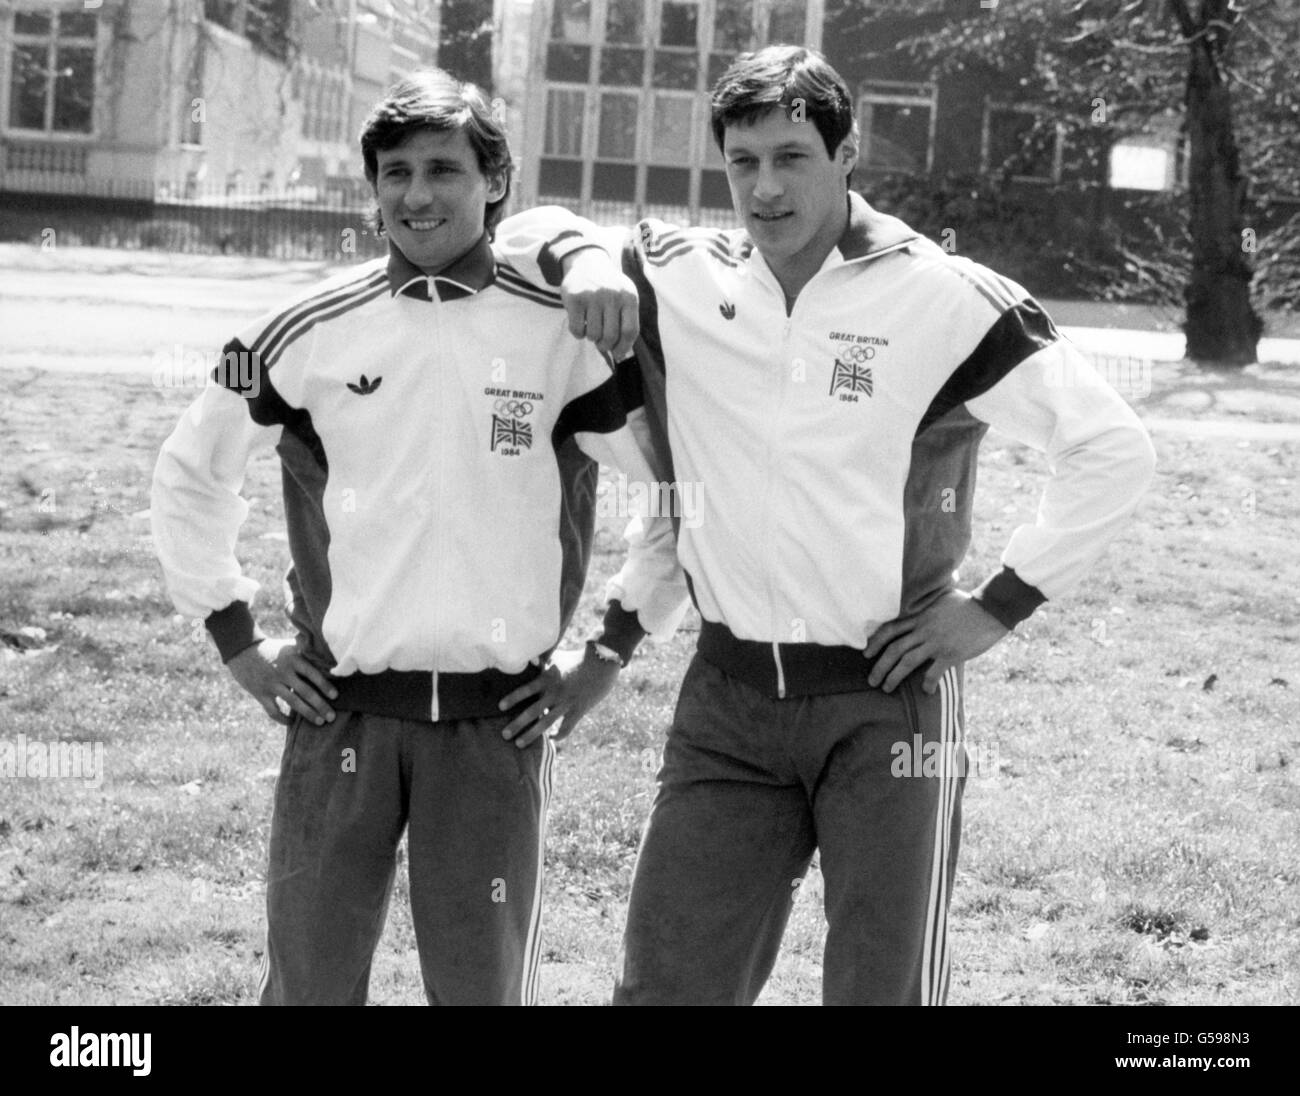 Olympic champions Sebastian Coe, left, and Alan Wells, wearing the new official British tracksuit for the Los Angeles 1984 Olympics. The tracksuit, called the 'Challenger' is specially designed by Adidas for the team. Stock Photo